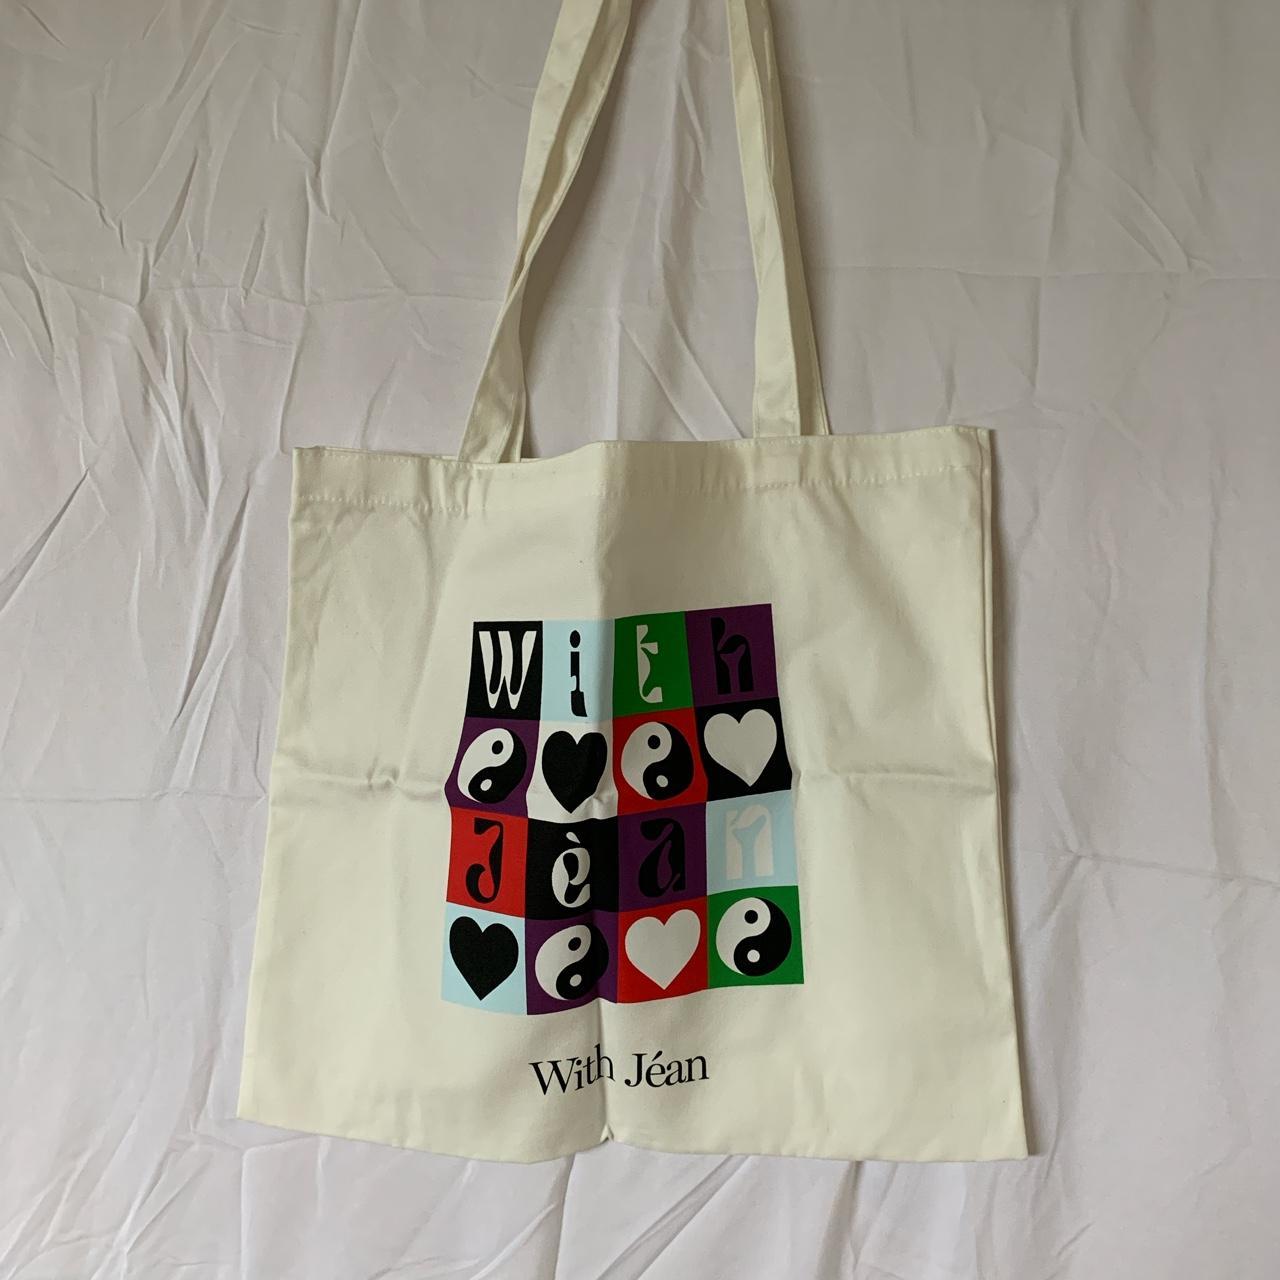 Product Image 1 - With Jean tote bag
brand new